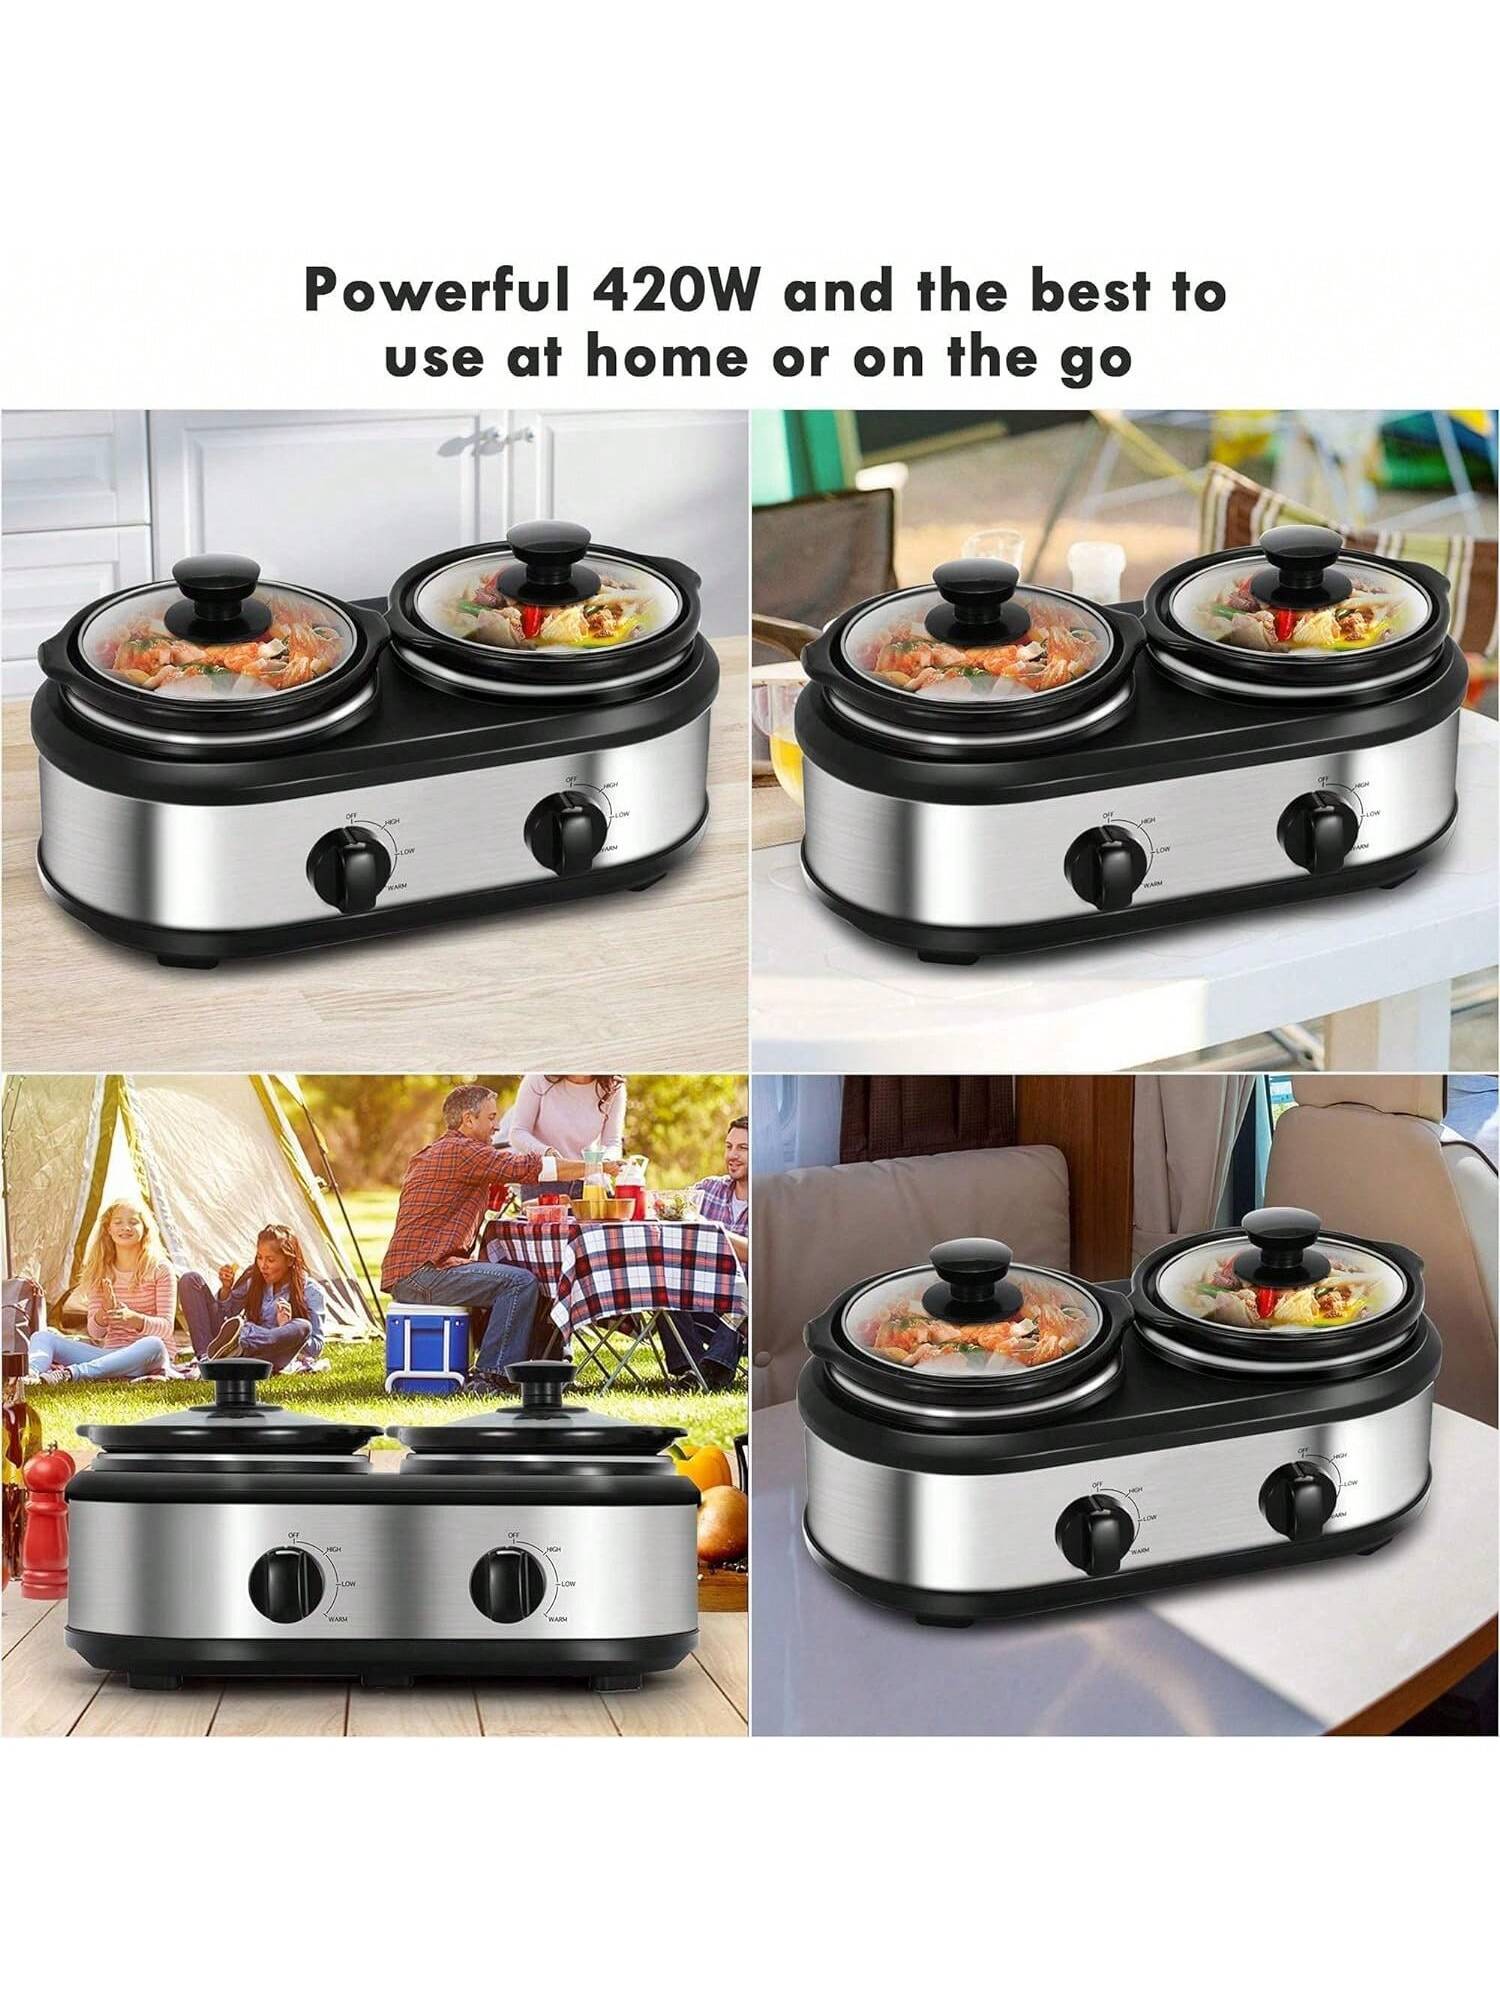  Triple Slow Cooker, 3 X 1.5QT Mini Individual Pots with  Adjustable Temp, Dishwasher Safe, Portable Buffet Server and Warmer, Safe  Ceramic Pots & Glass Lid, Stainless Steel: Home & Kitchen